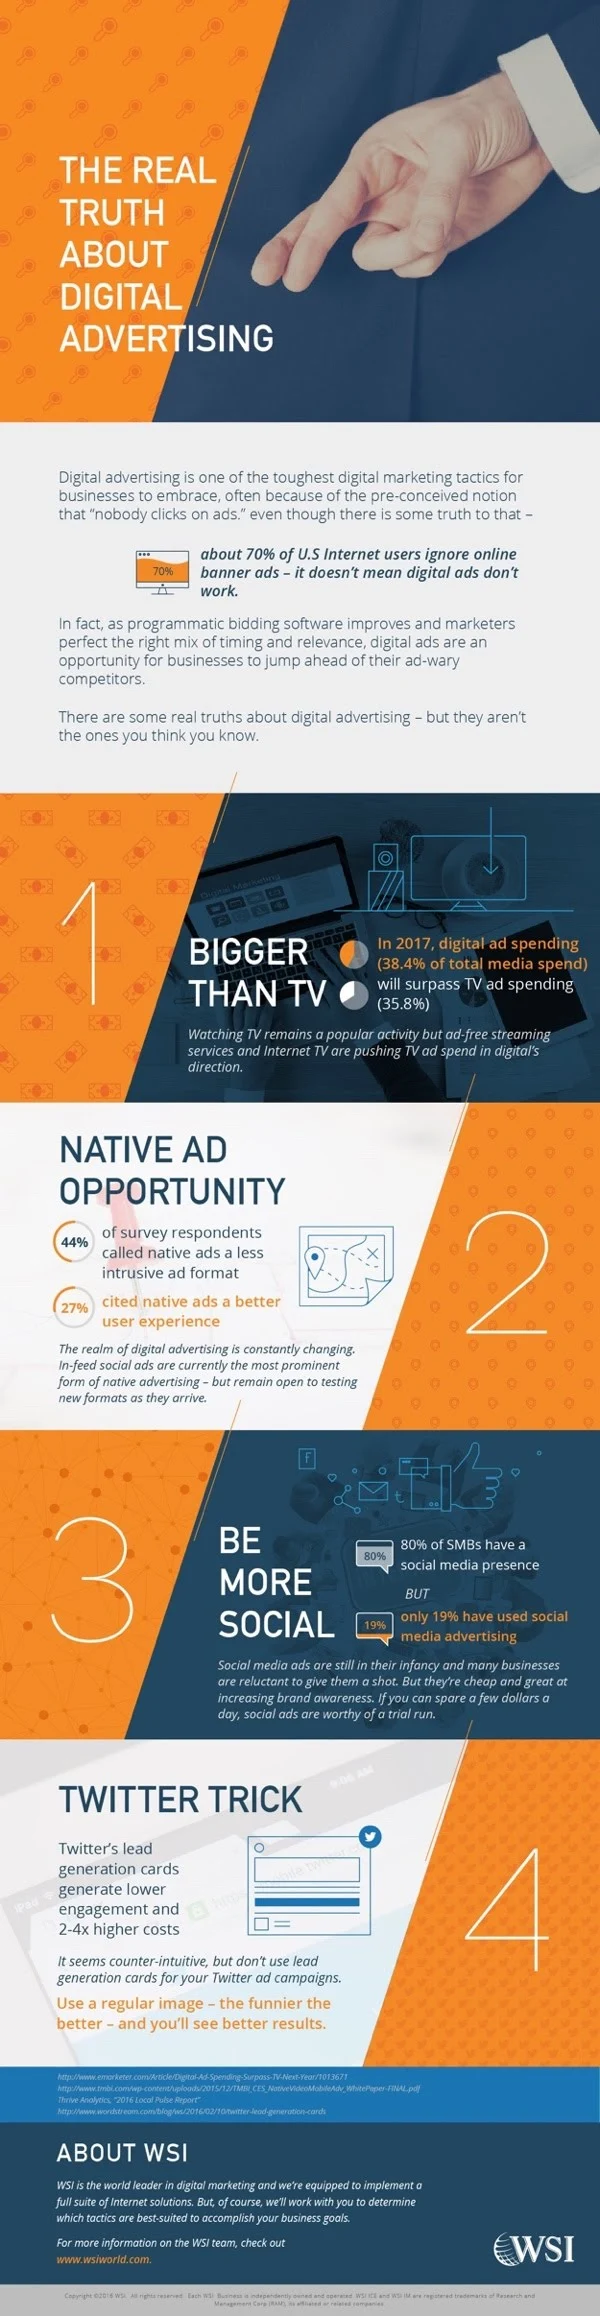 The Real Truth About Digital Advertising - #infographic